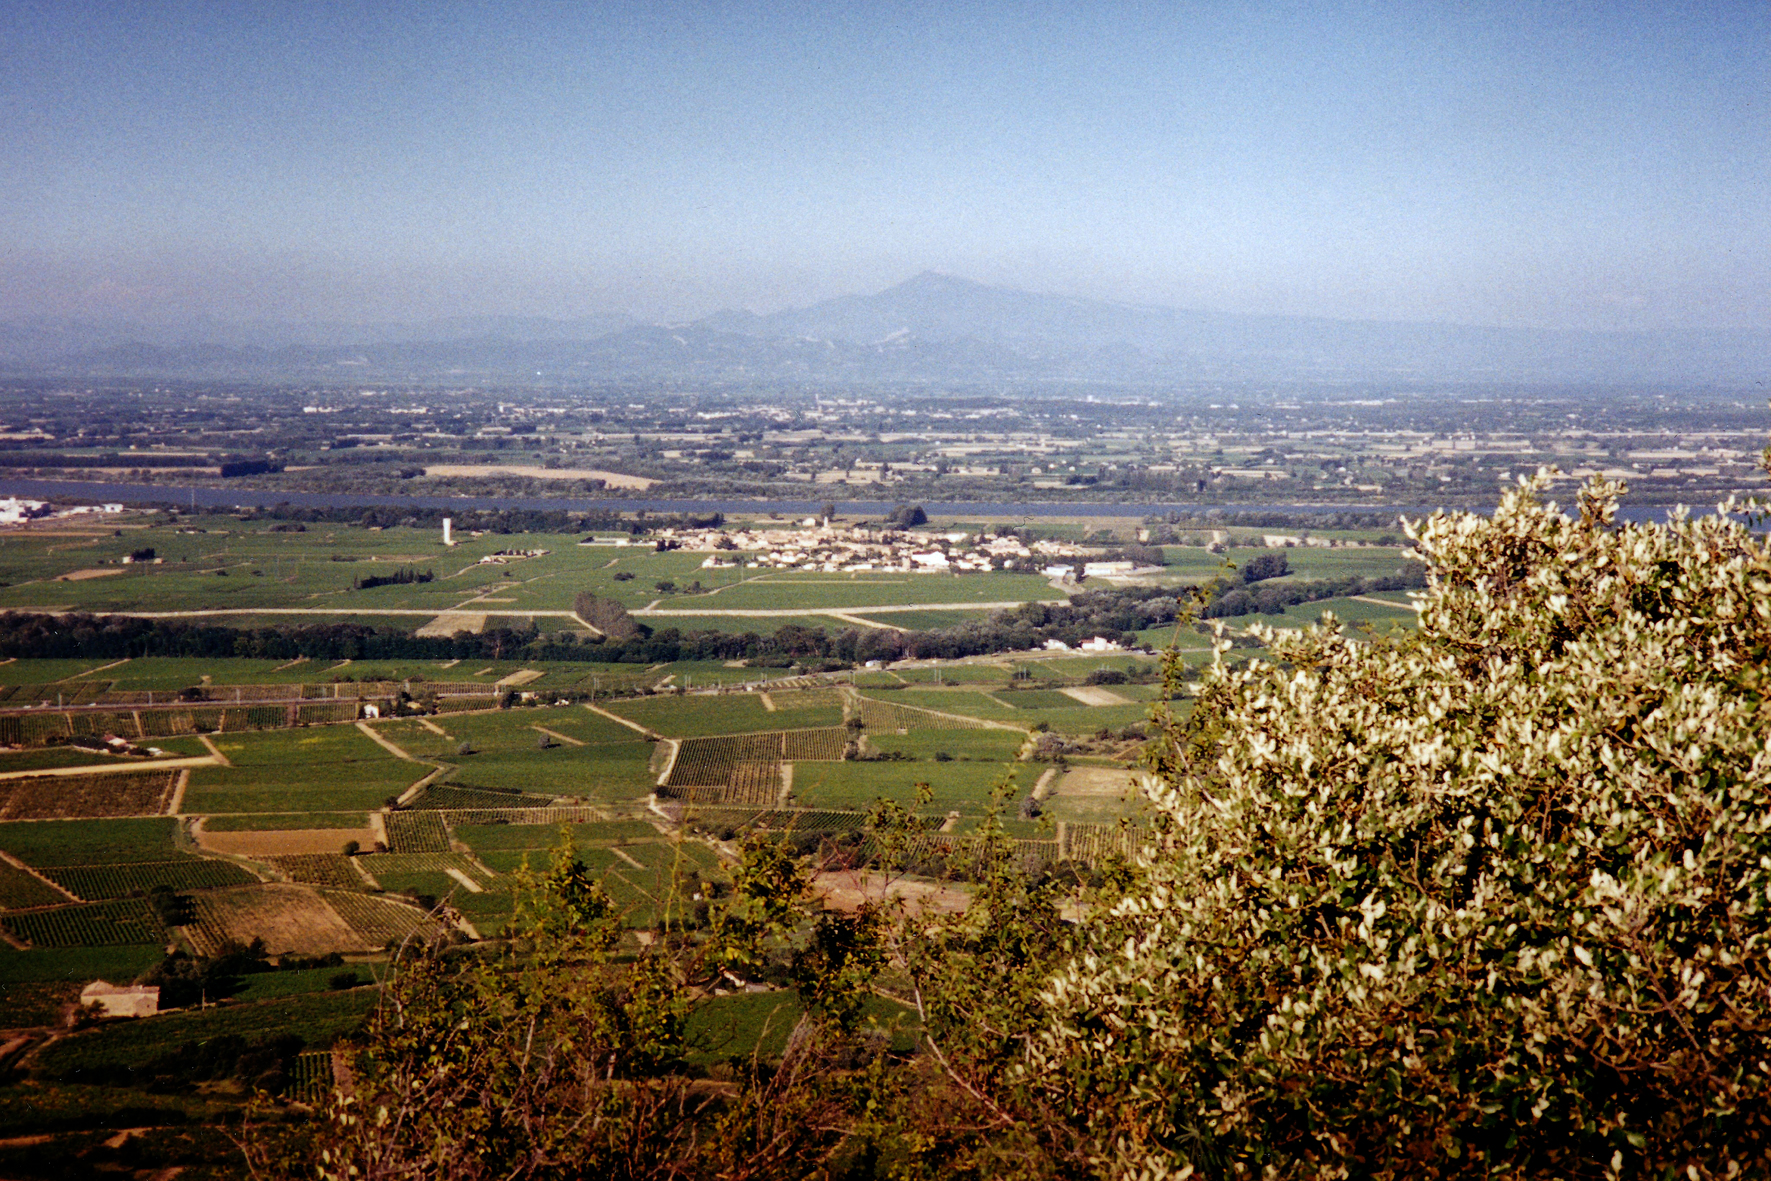 View to the east, over the Rhone valley